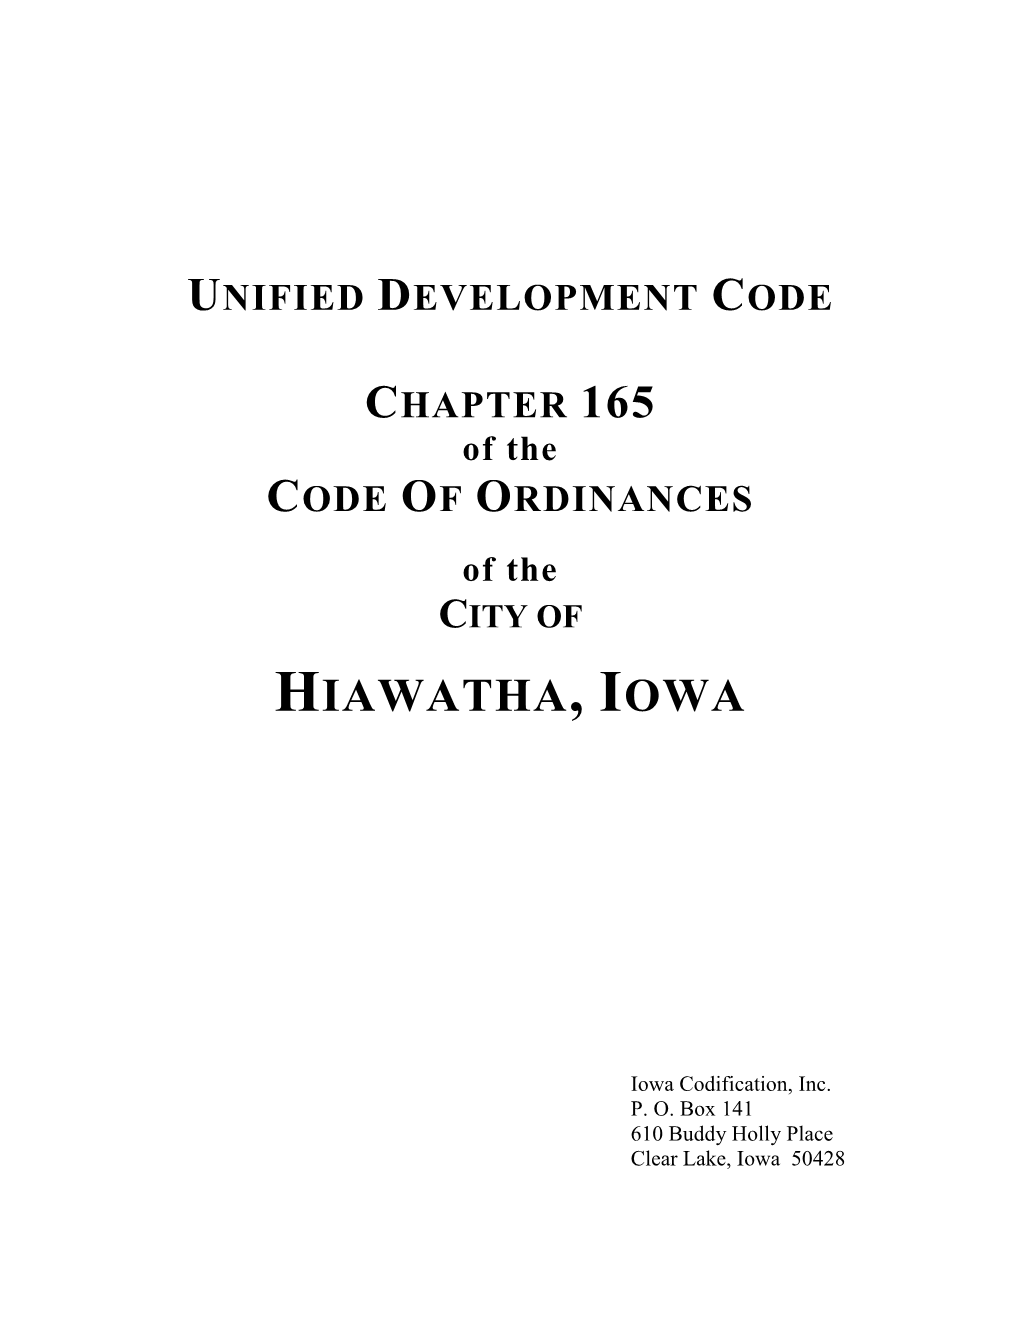 CHAPTER 165 of the CODE of ORDINANCES